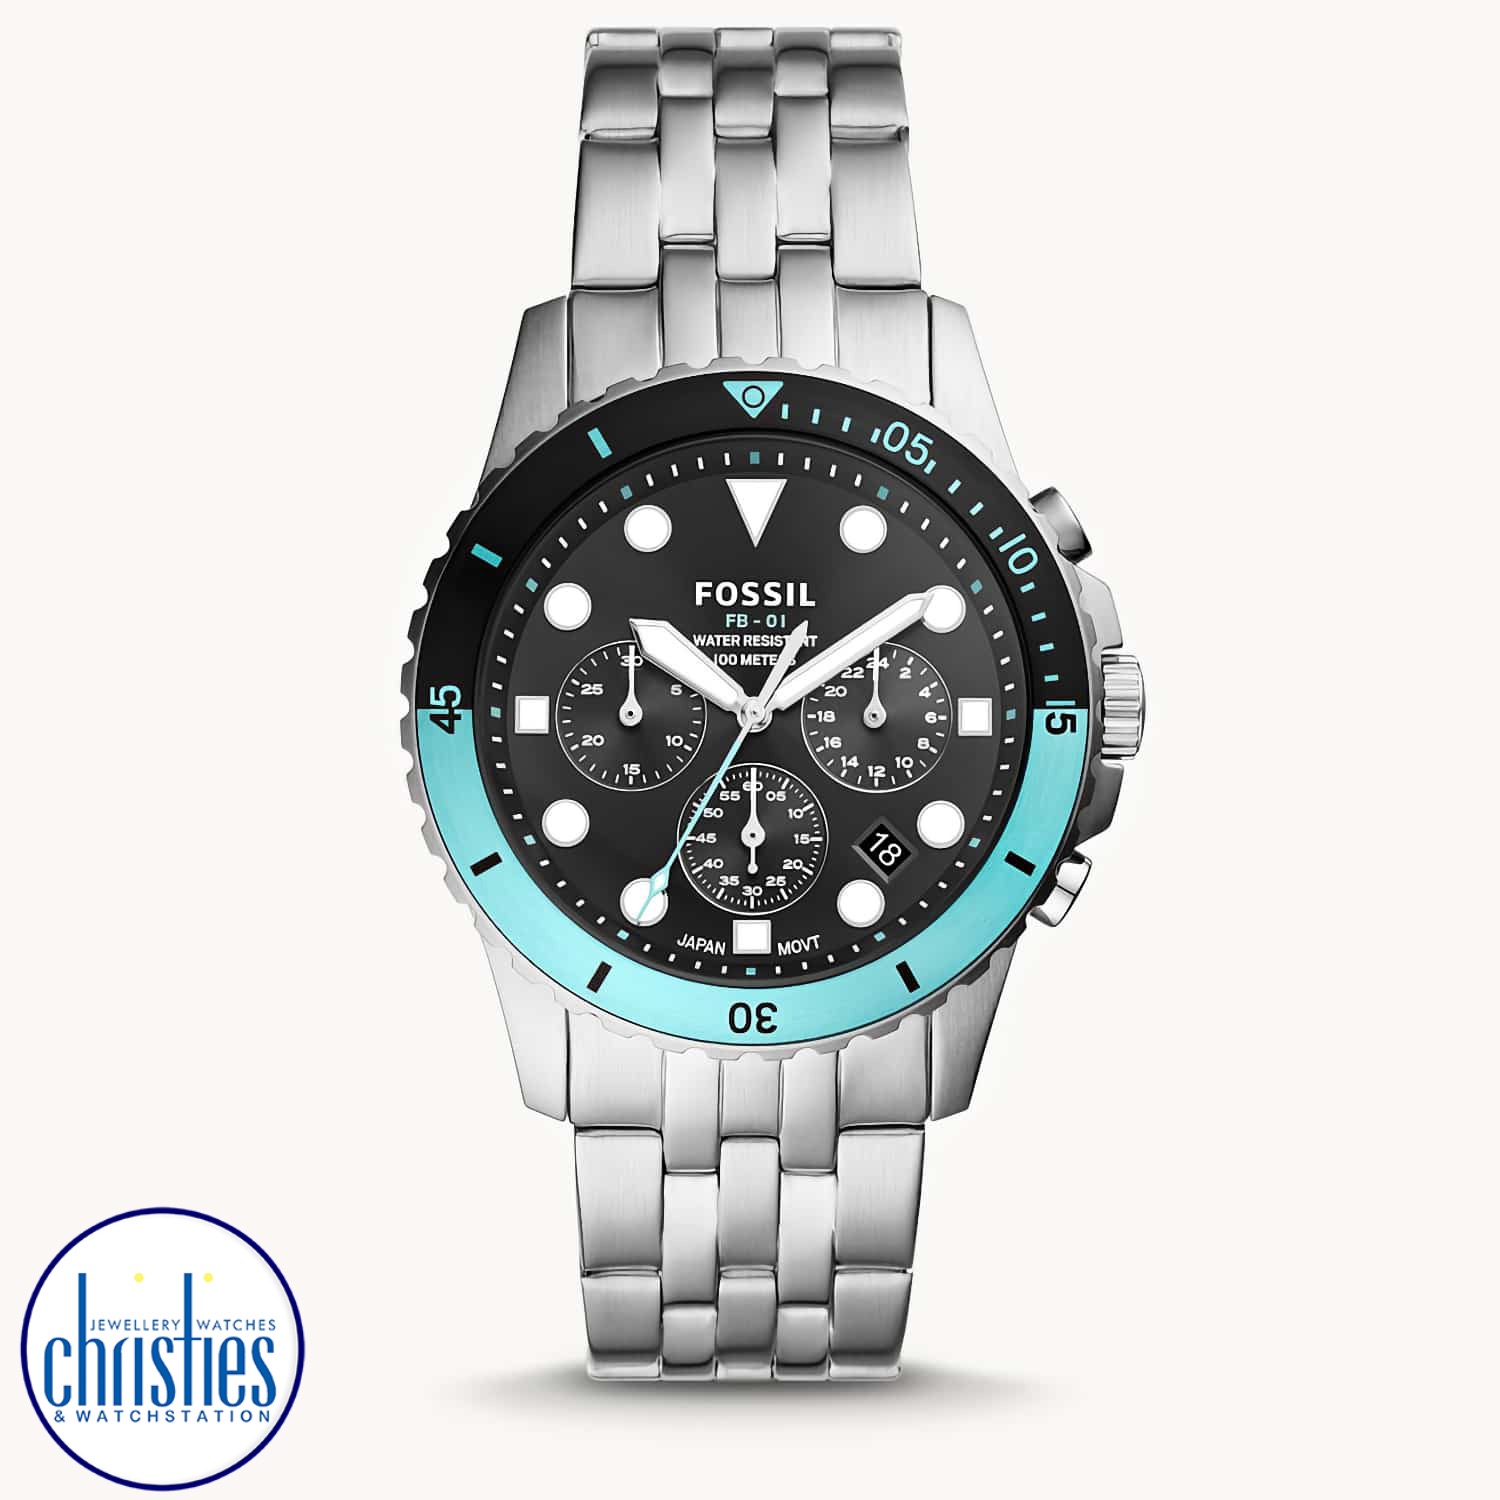 FS5827 Fossil FB-01 Chronograph Stainless Steel Watch. FS5827 Fossil FB-01 Chronograph Stainless Steel Watch Afterpay - Split your purchase into 4 instalments - Pay for your purchase over 4 instalments, due every two weeks. You’ll pay your first installme